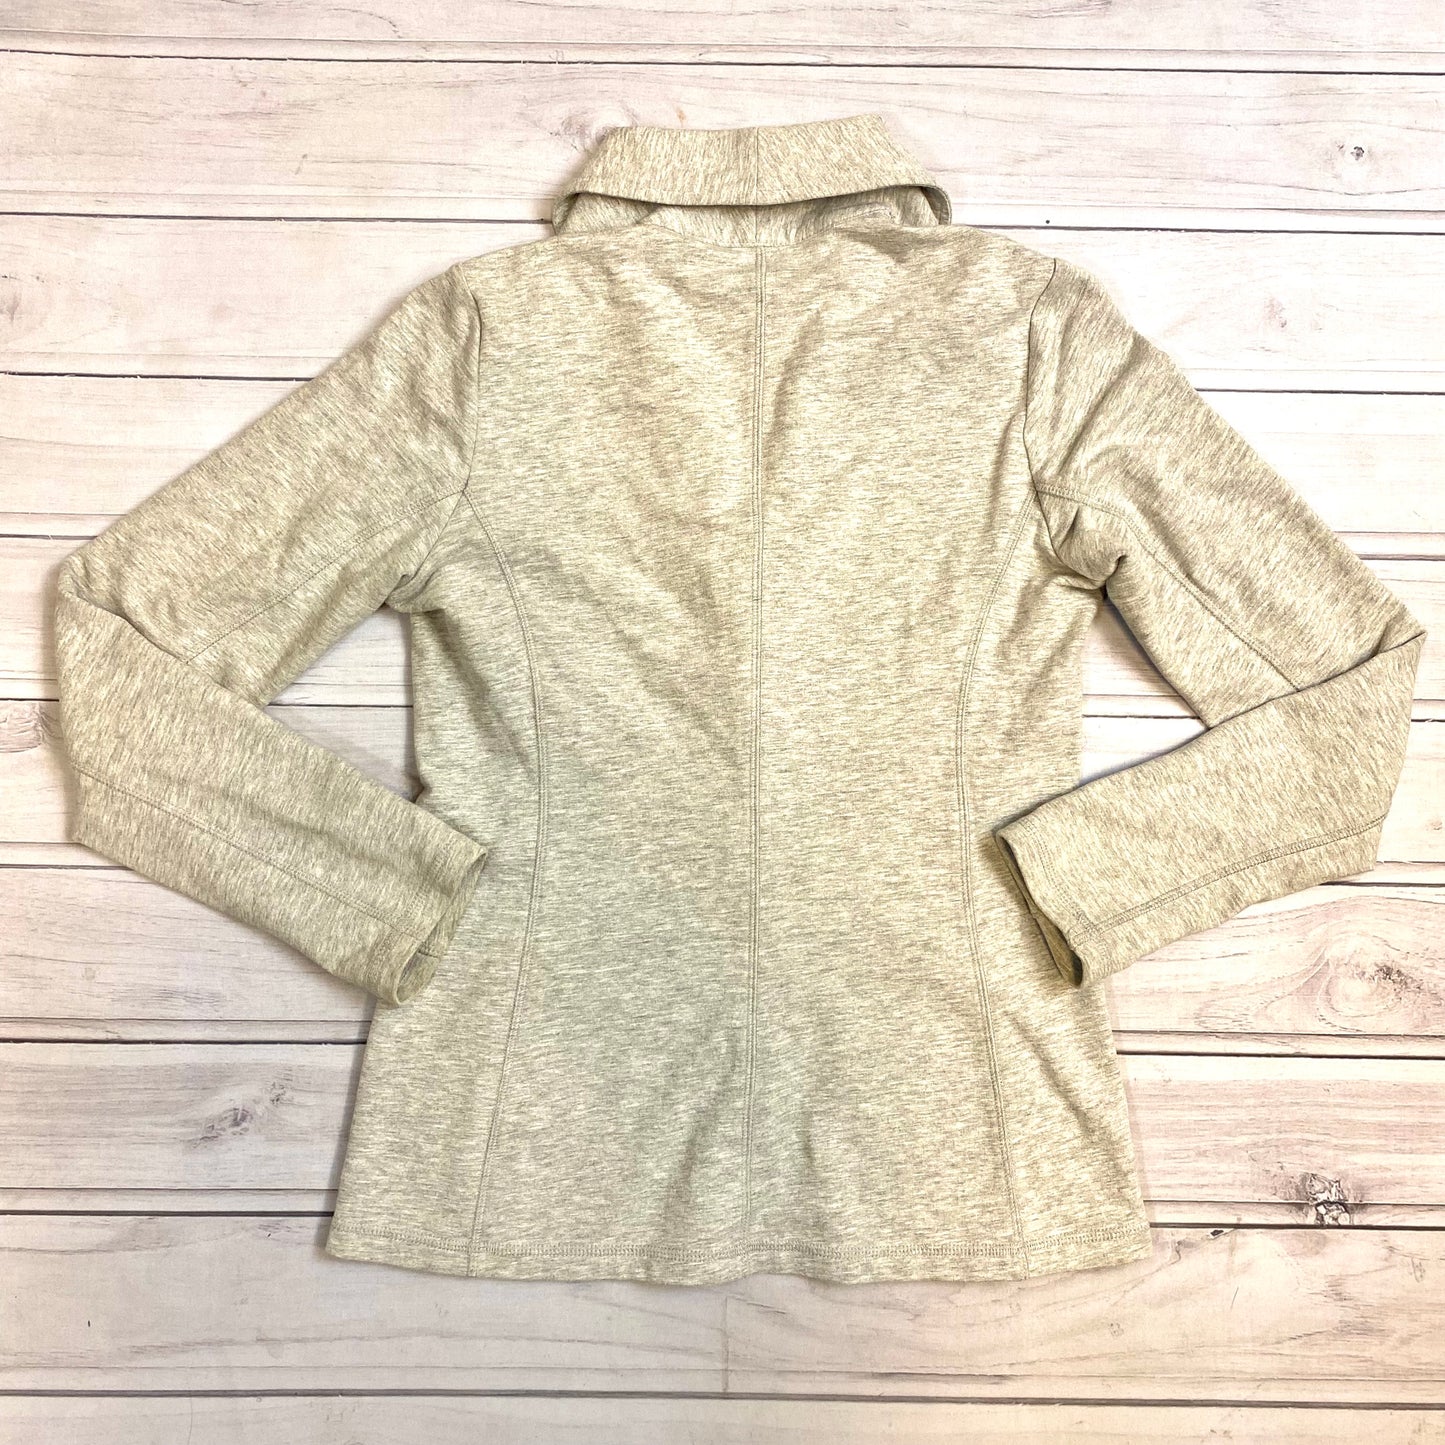 Cardigan Designer By Lilly Pulitzer  Size: Xs